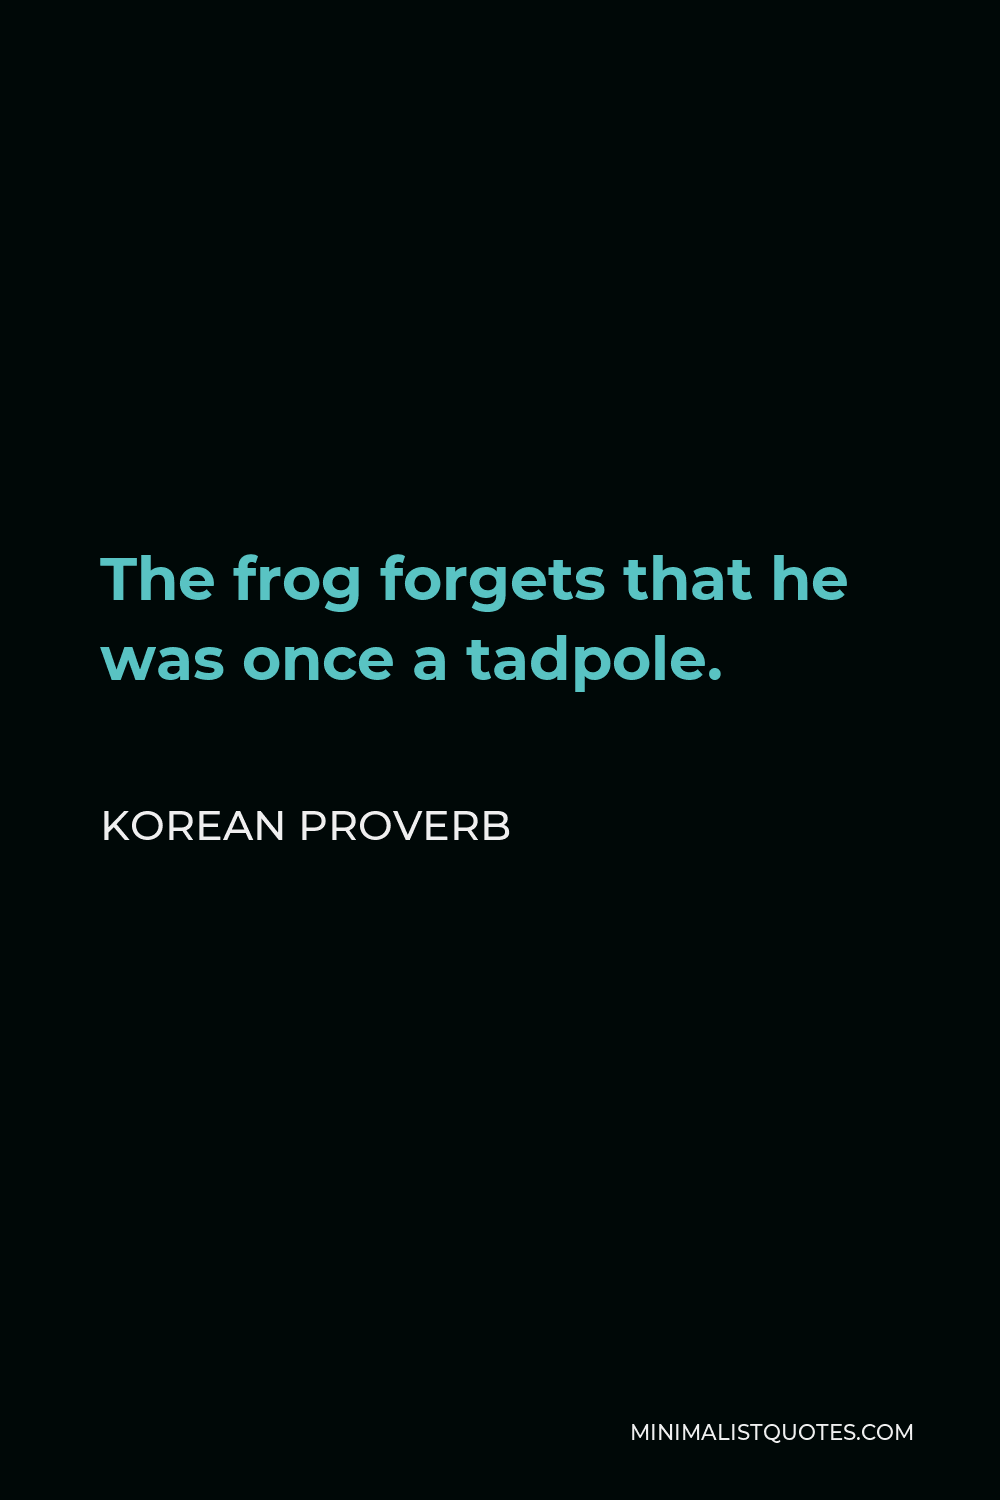 Korean Proverb Quote - The frog forgets that he was once a tadpole.